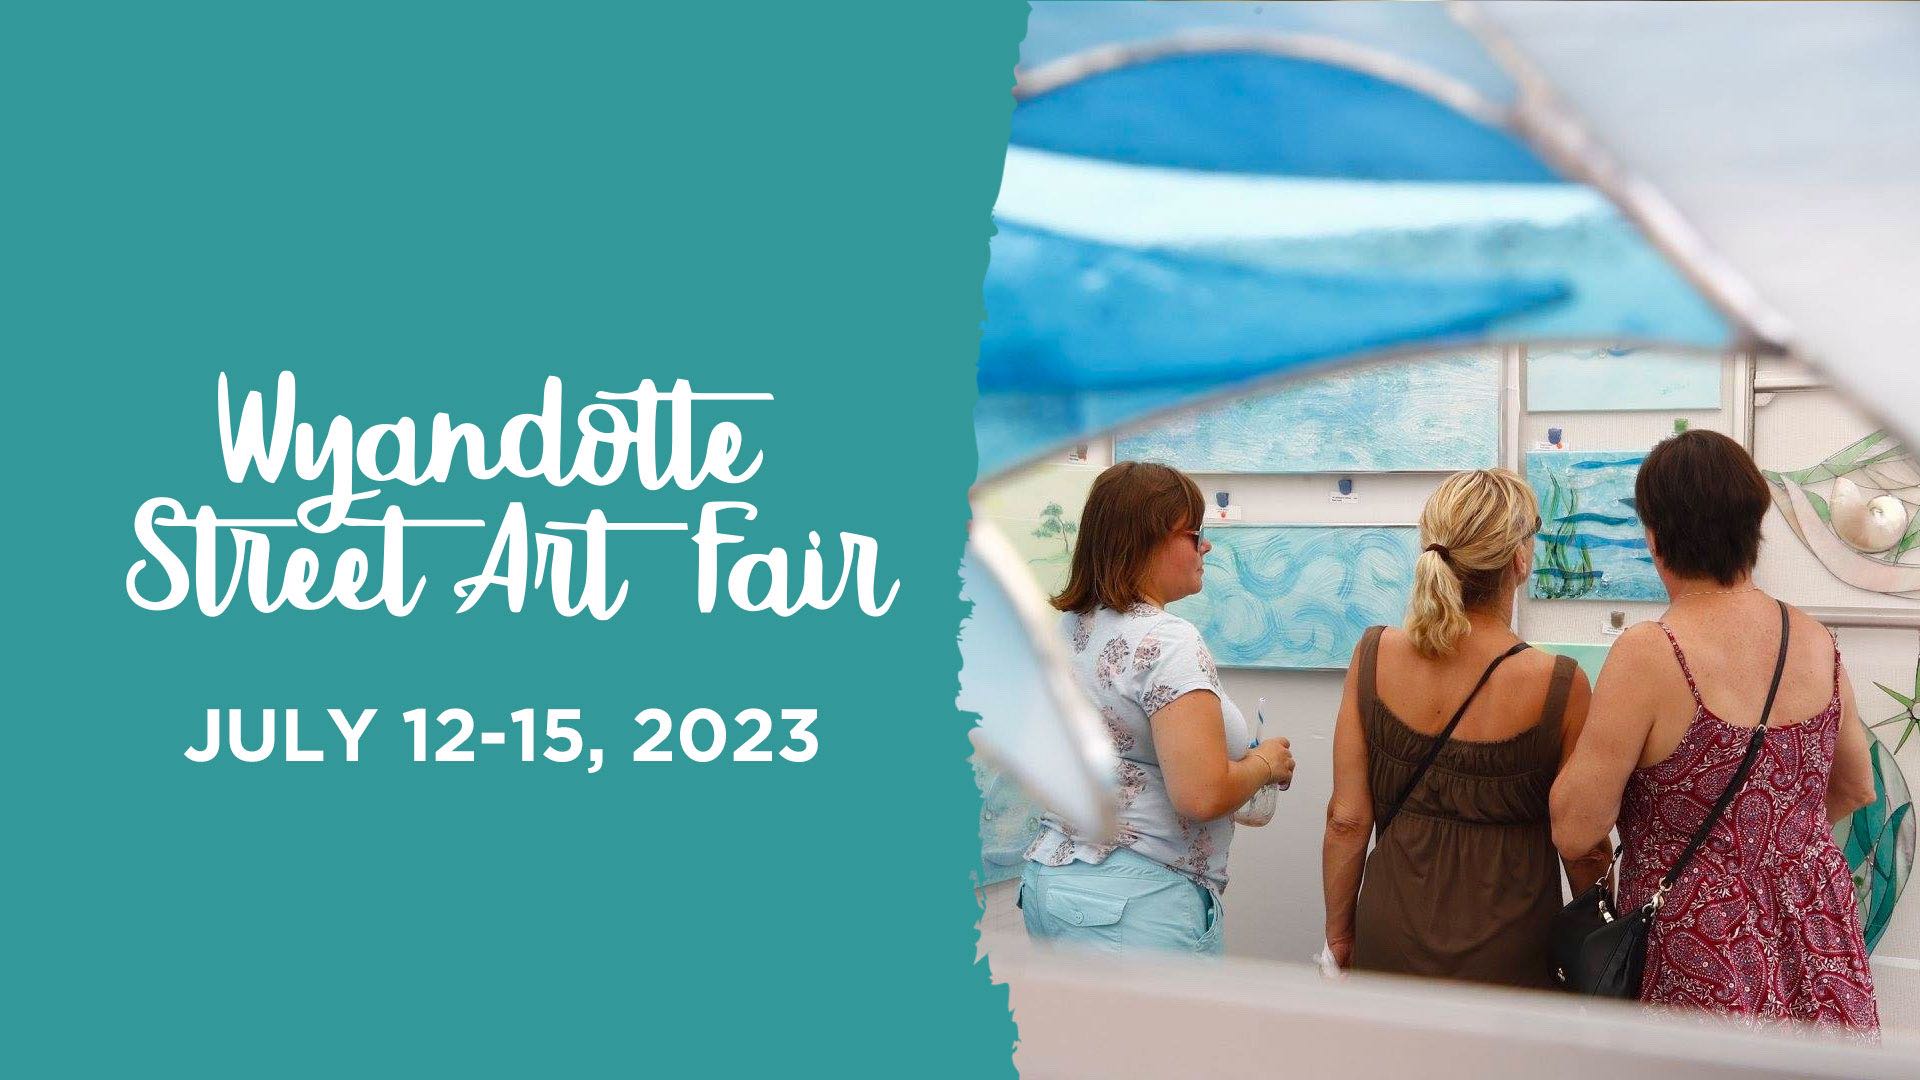 Wyandotte Street Art Fair; July 12-15, 2023. Event logo overlaying image of women in booth looking at art